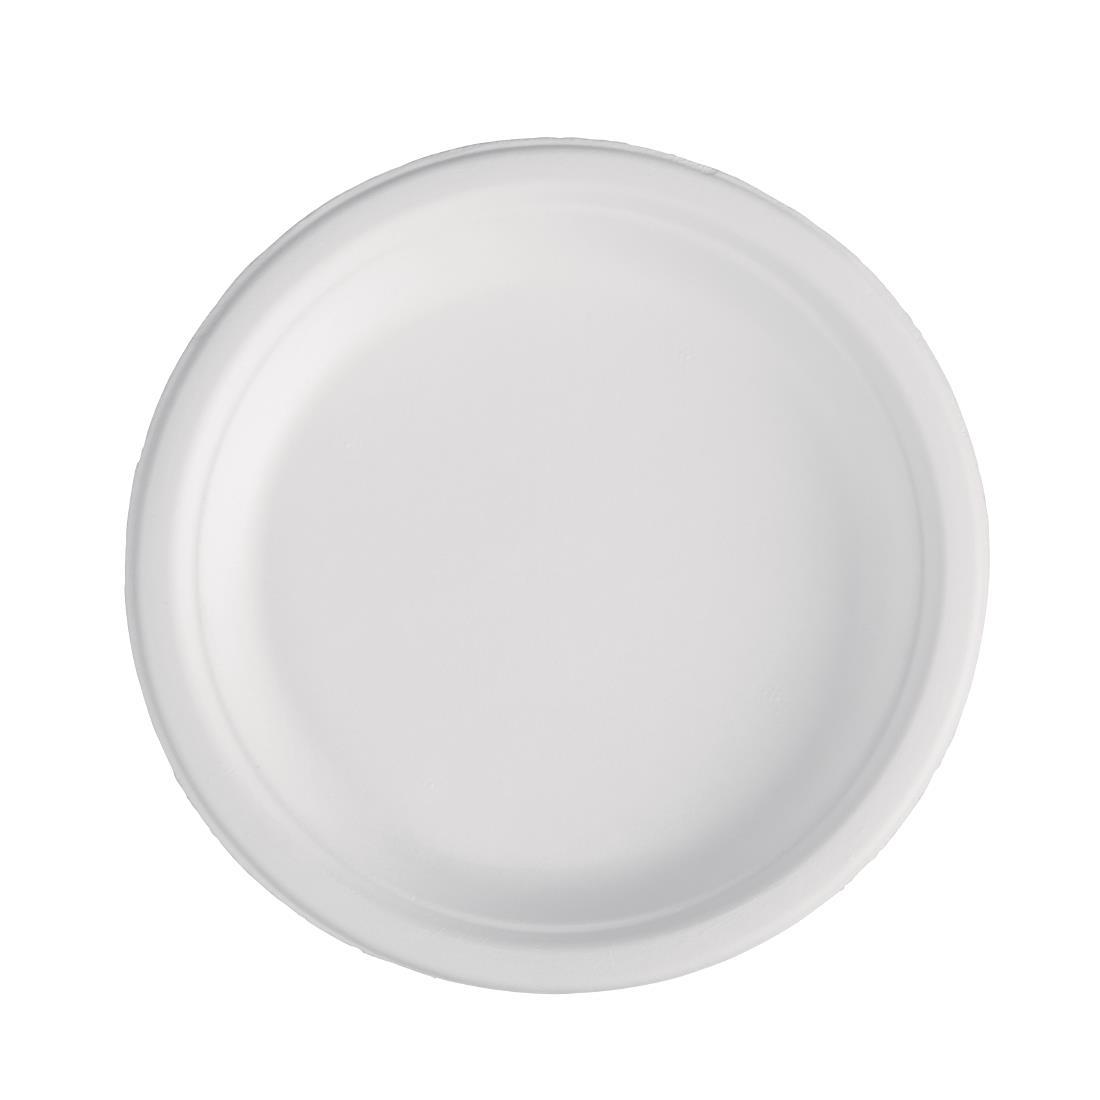 Fiesta Compostable Bagasse Plates Round 179mm (Pack of 50) - CW905  - 2